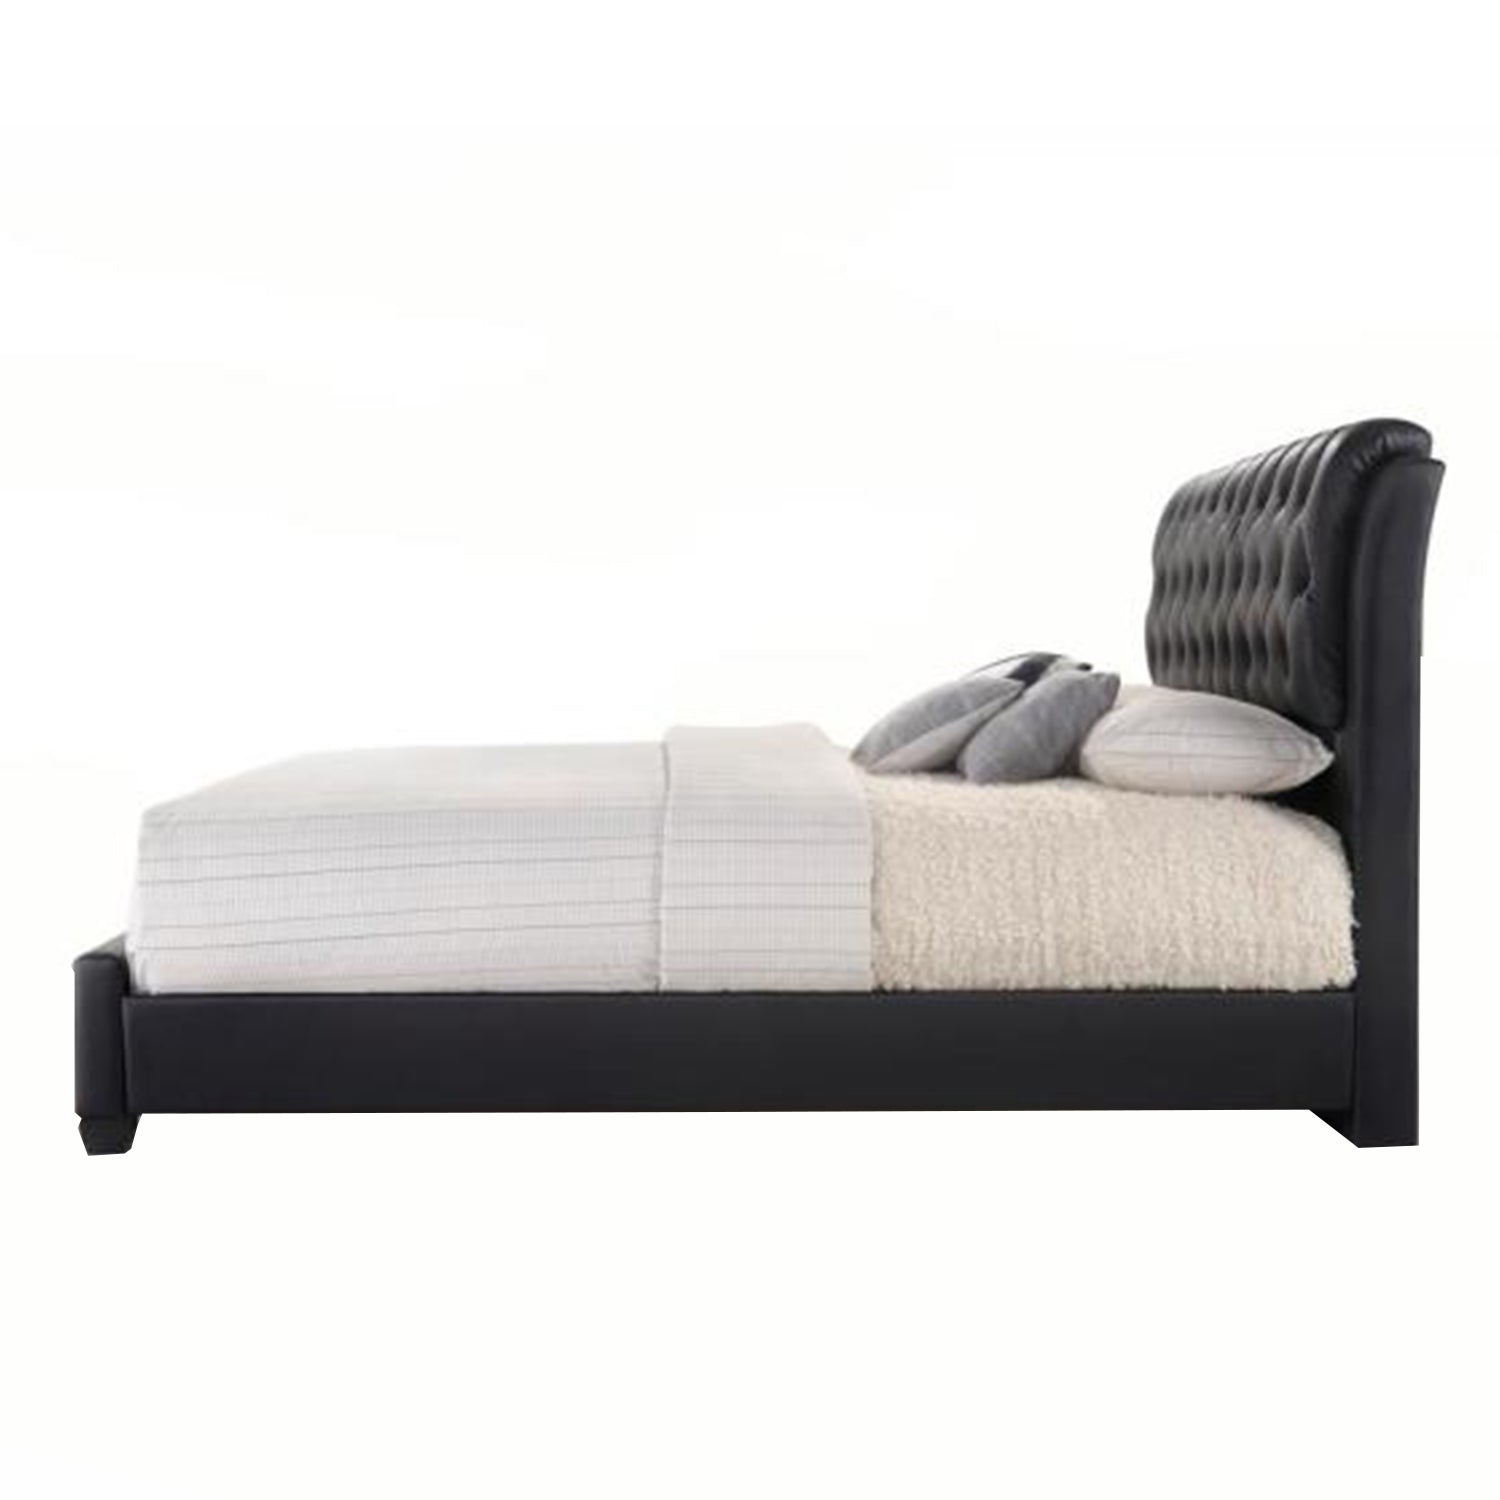 90' X 79' X 49' Black Pu Button Tufted King Bed